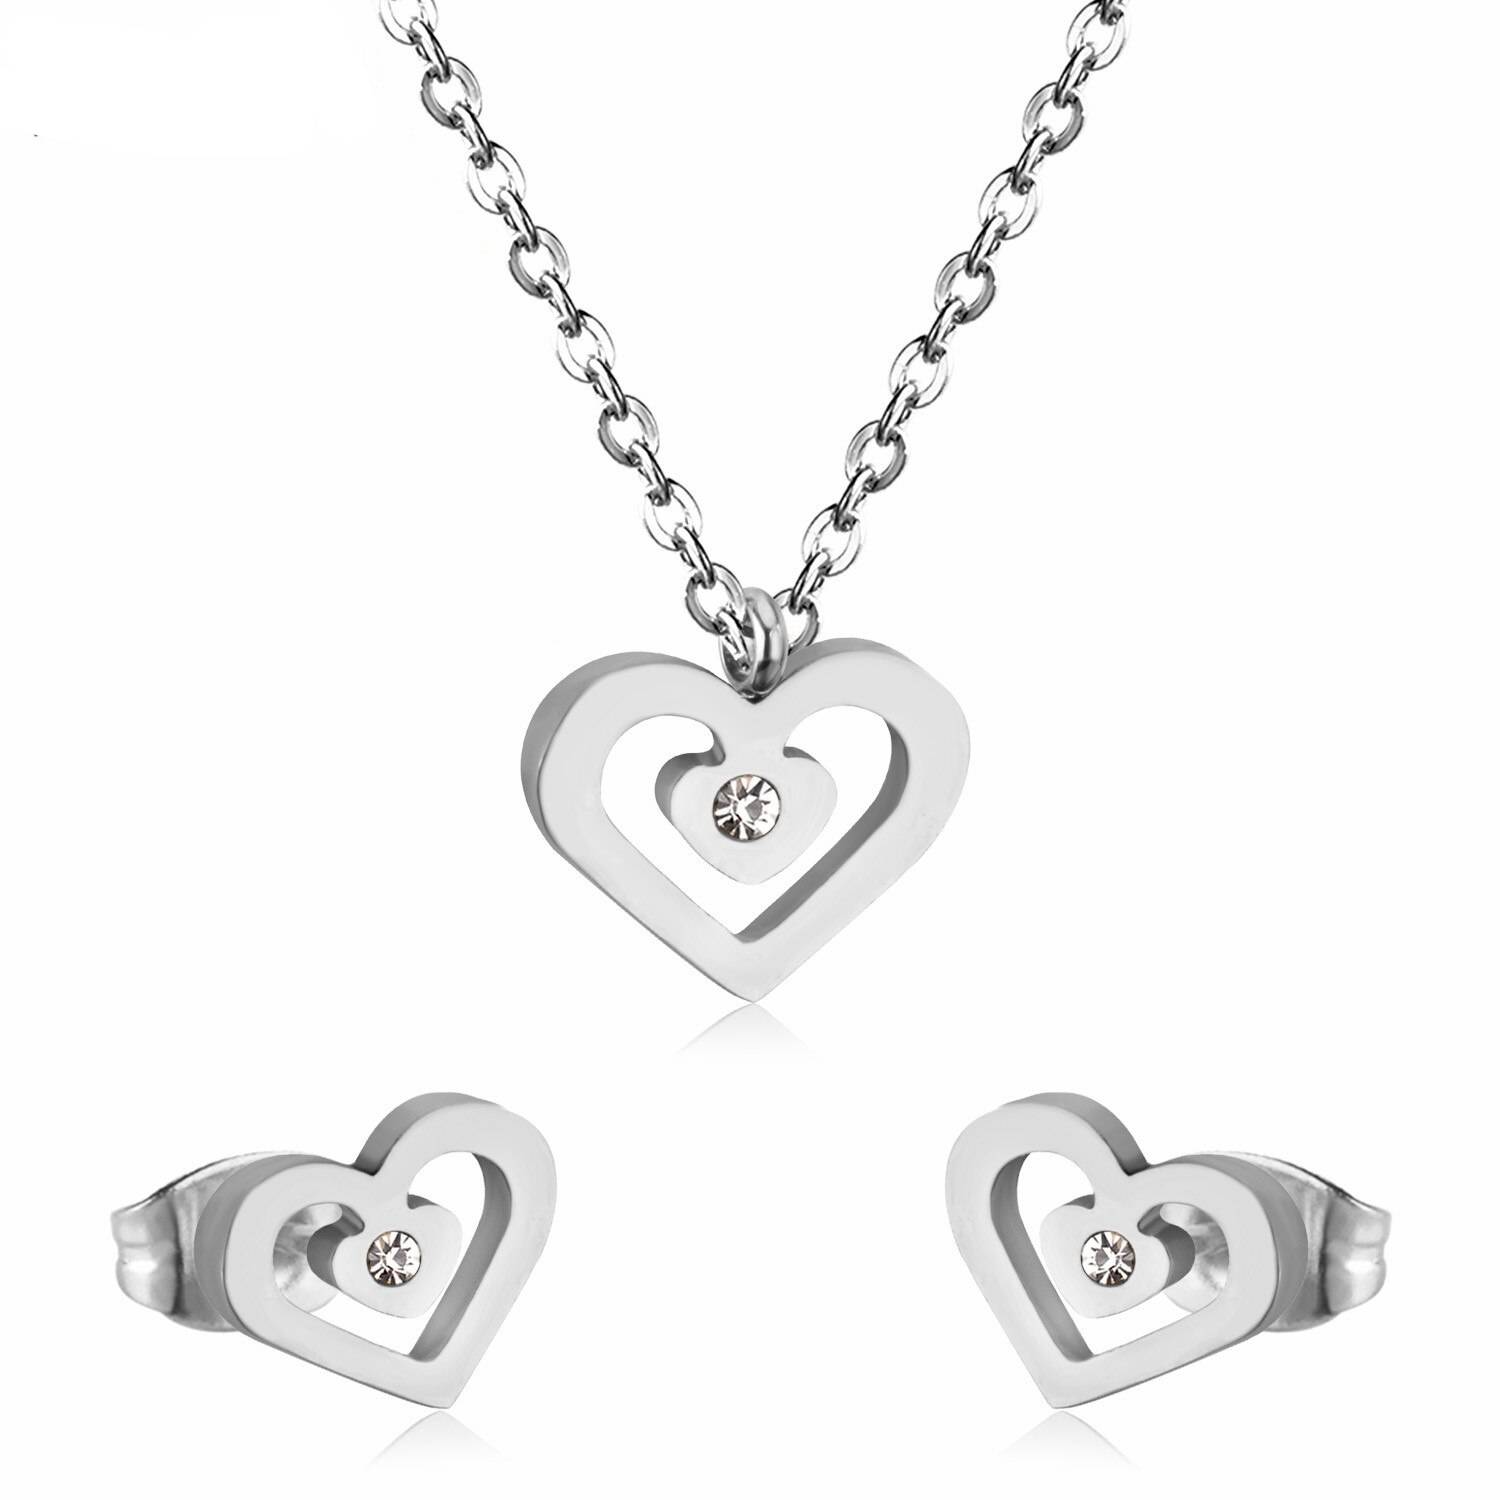 Nora – Stainless Steel Cubic Zirconia Heart Jewellery Set Jewellery Sets 8d255f28538fbae46aeae7: Gold|Silver